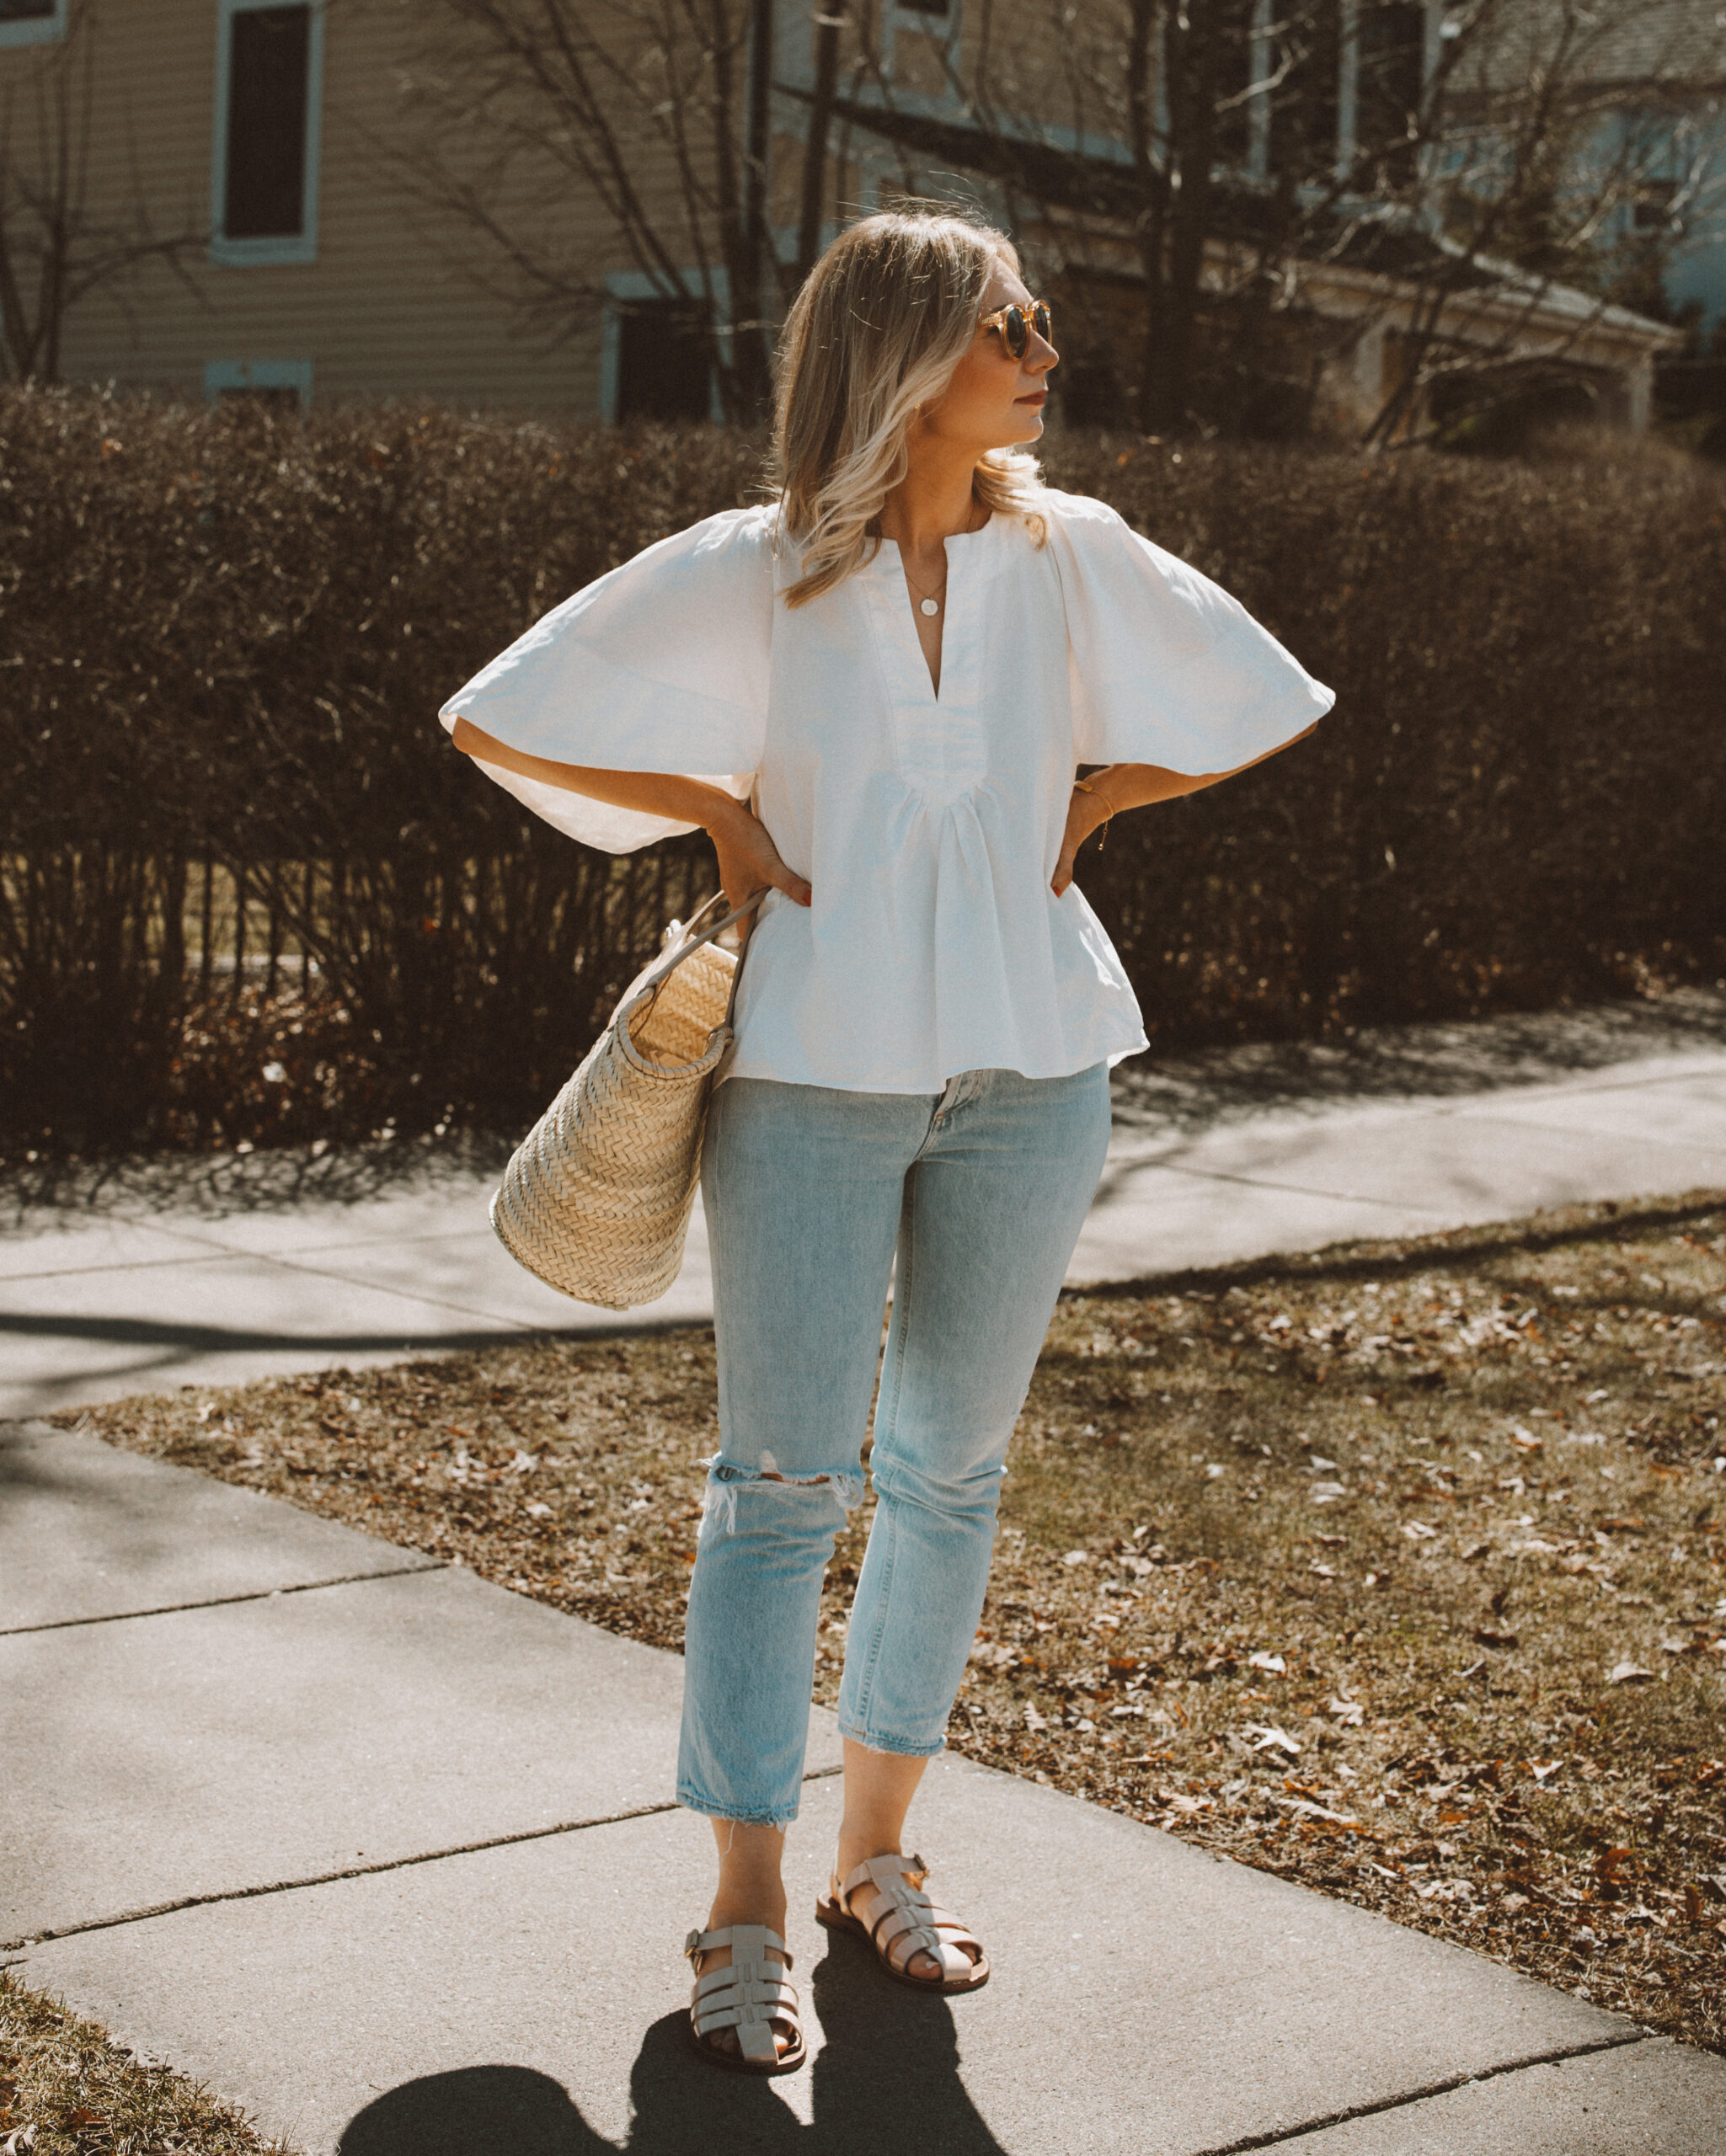 Karin Emily wears a white flutter sleeve blouse with a pair of light blue wash riley jeans from Agolde, a straw Cabas bag from Hereu, fisherman sandals from J. Crew, and clear framed sunglasses